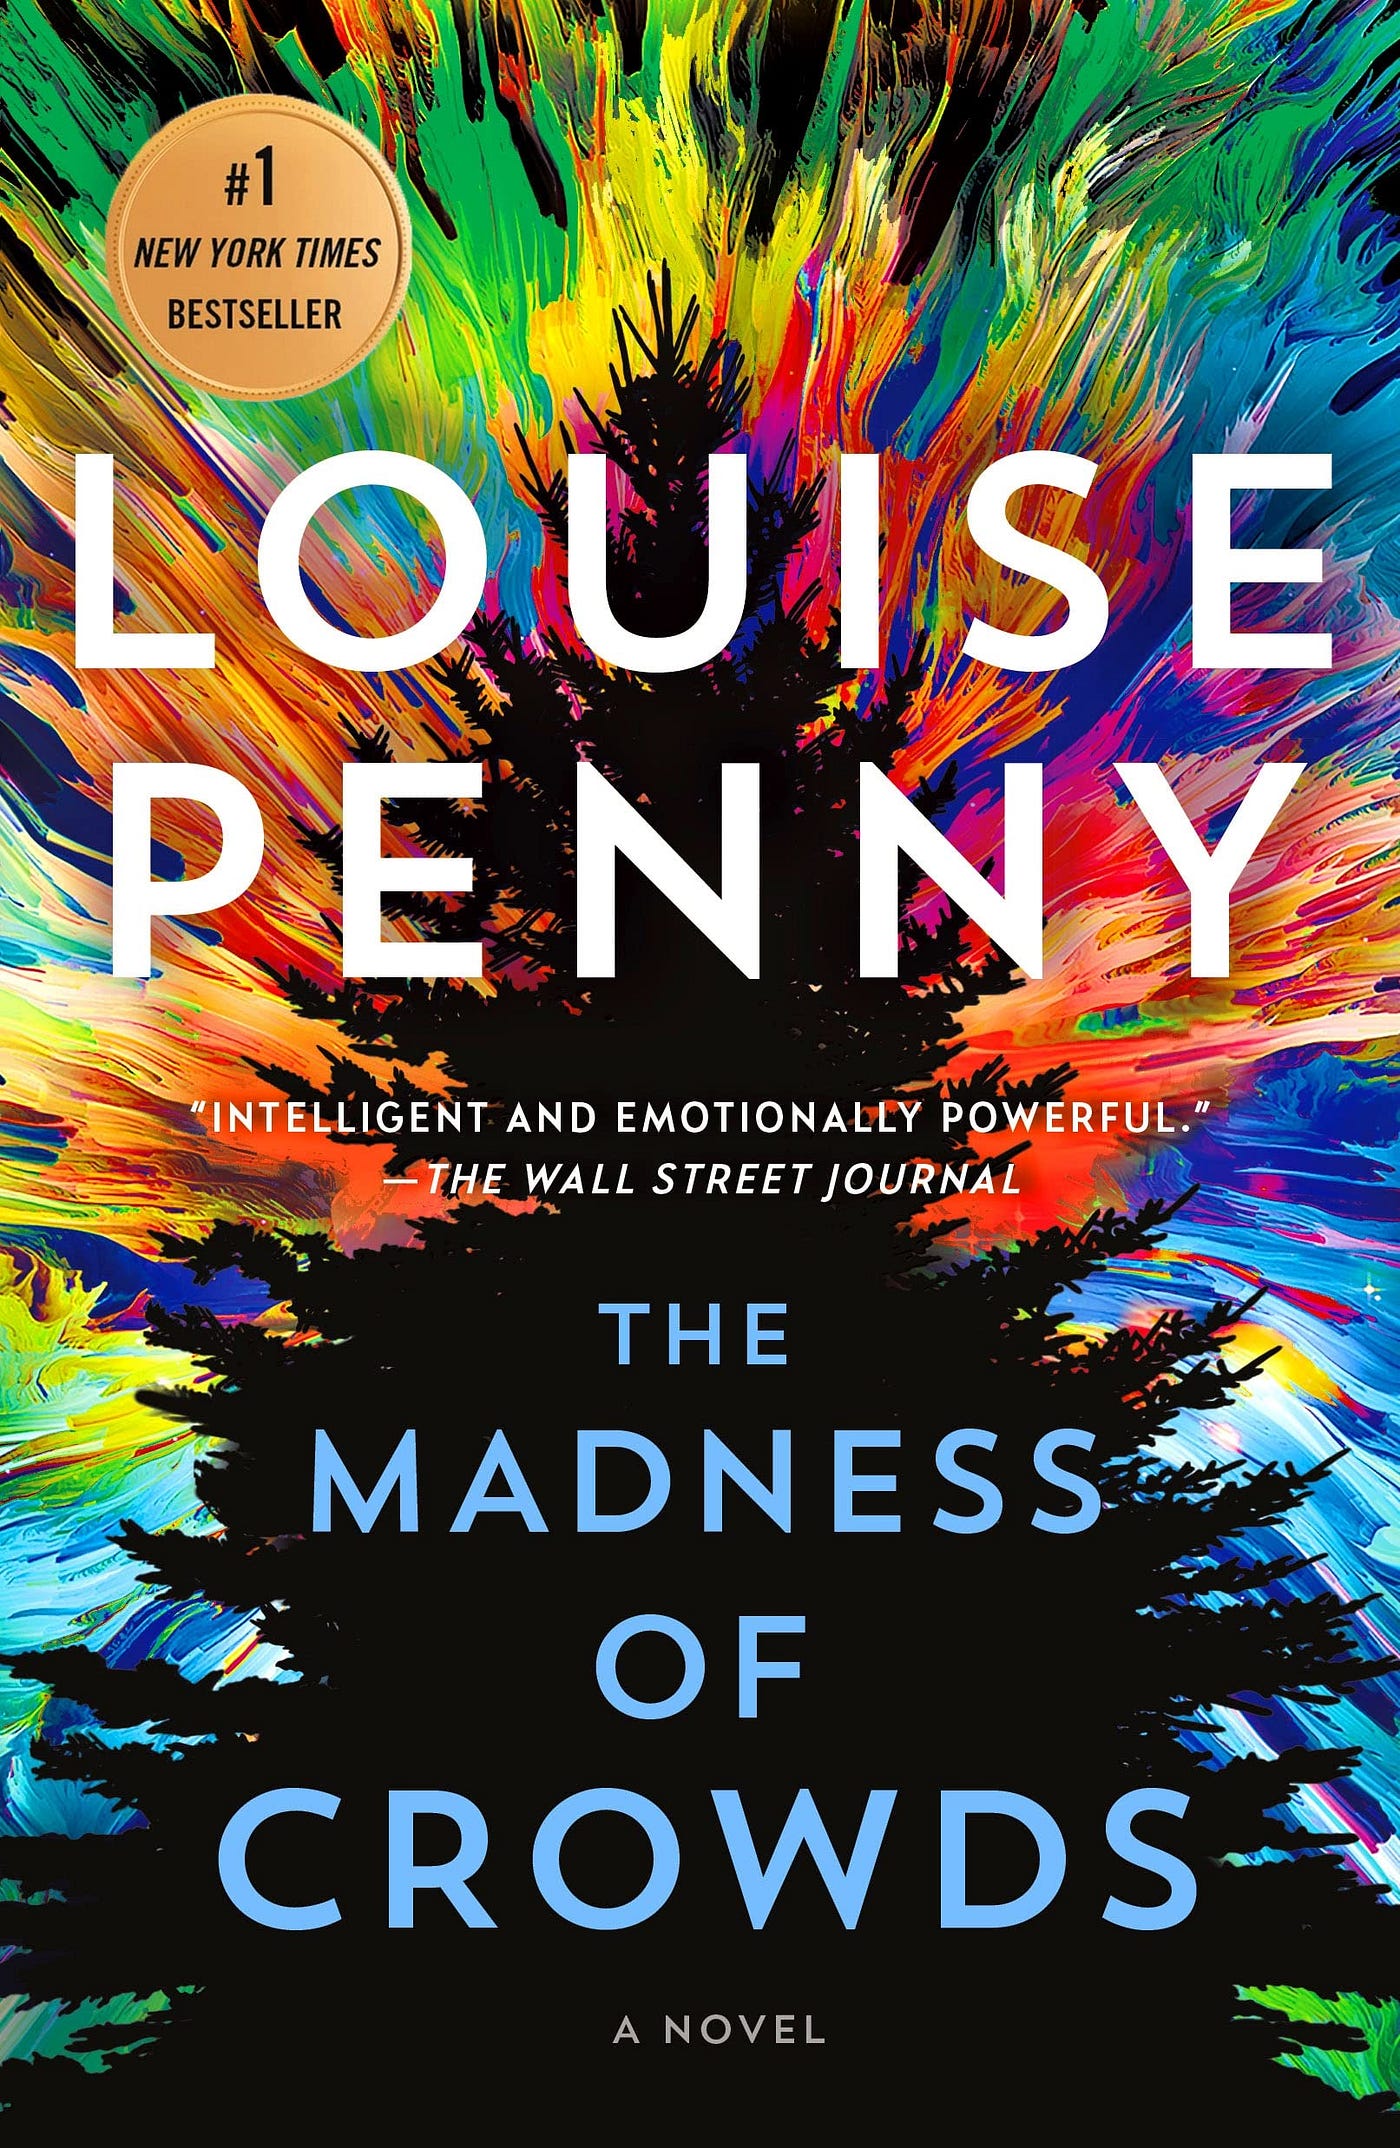 Every Single Louise Penny Books In Order, With Summaries!, by Novel Nest